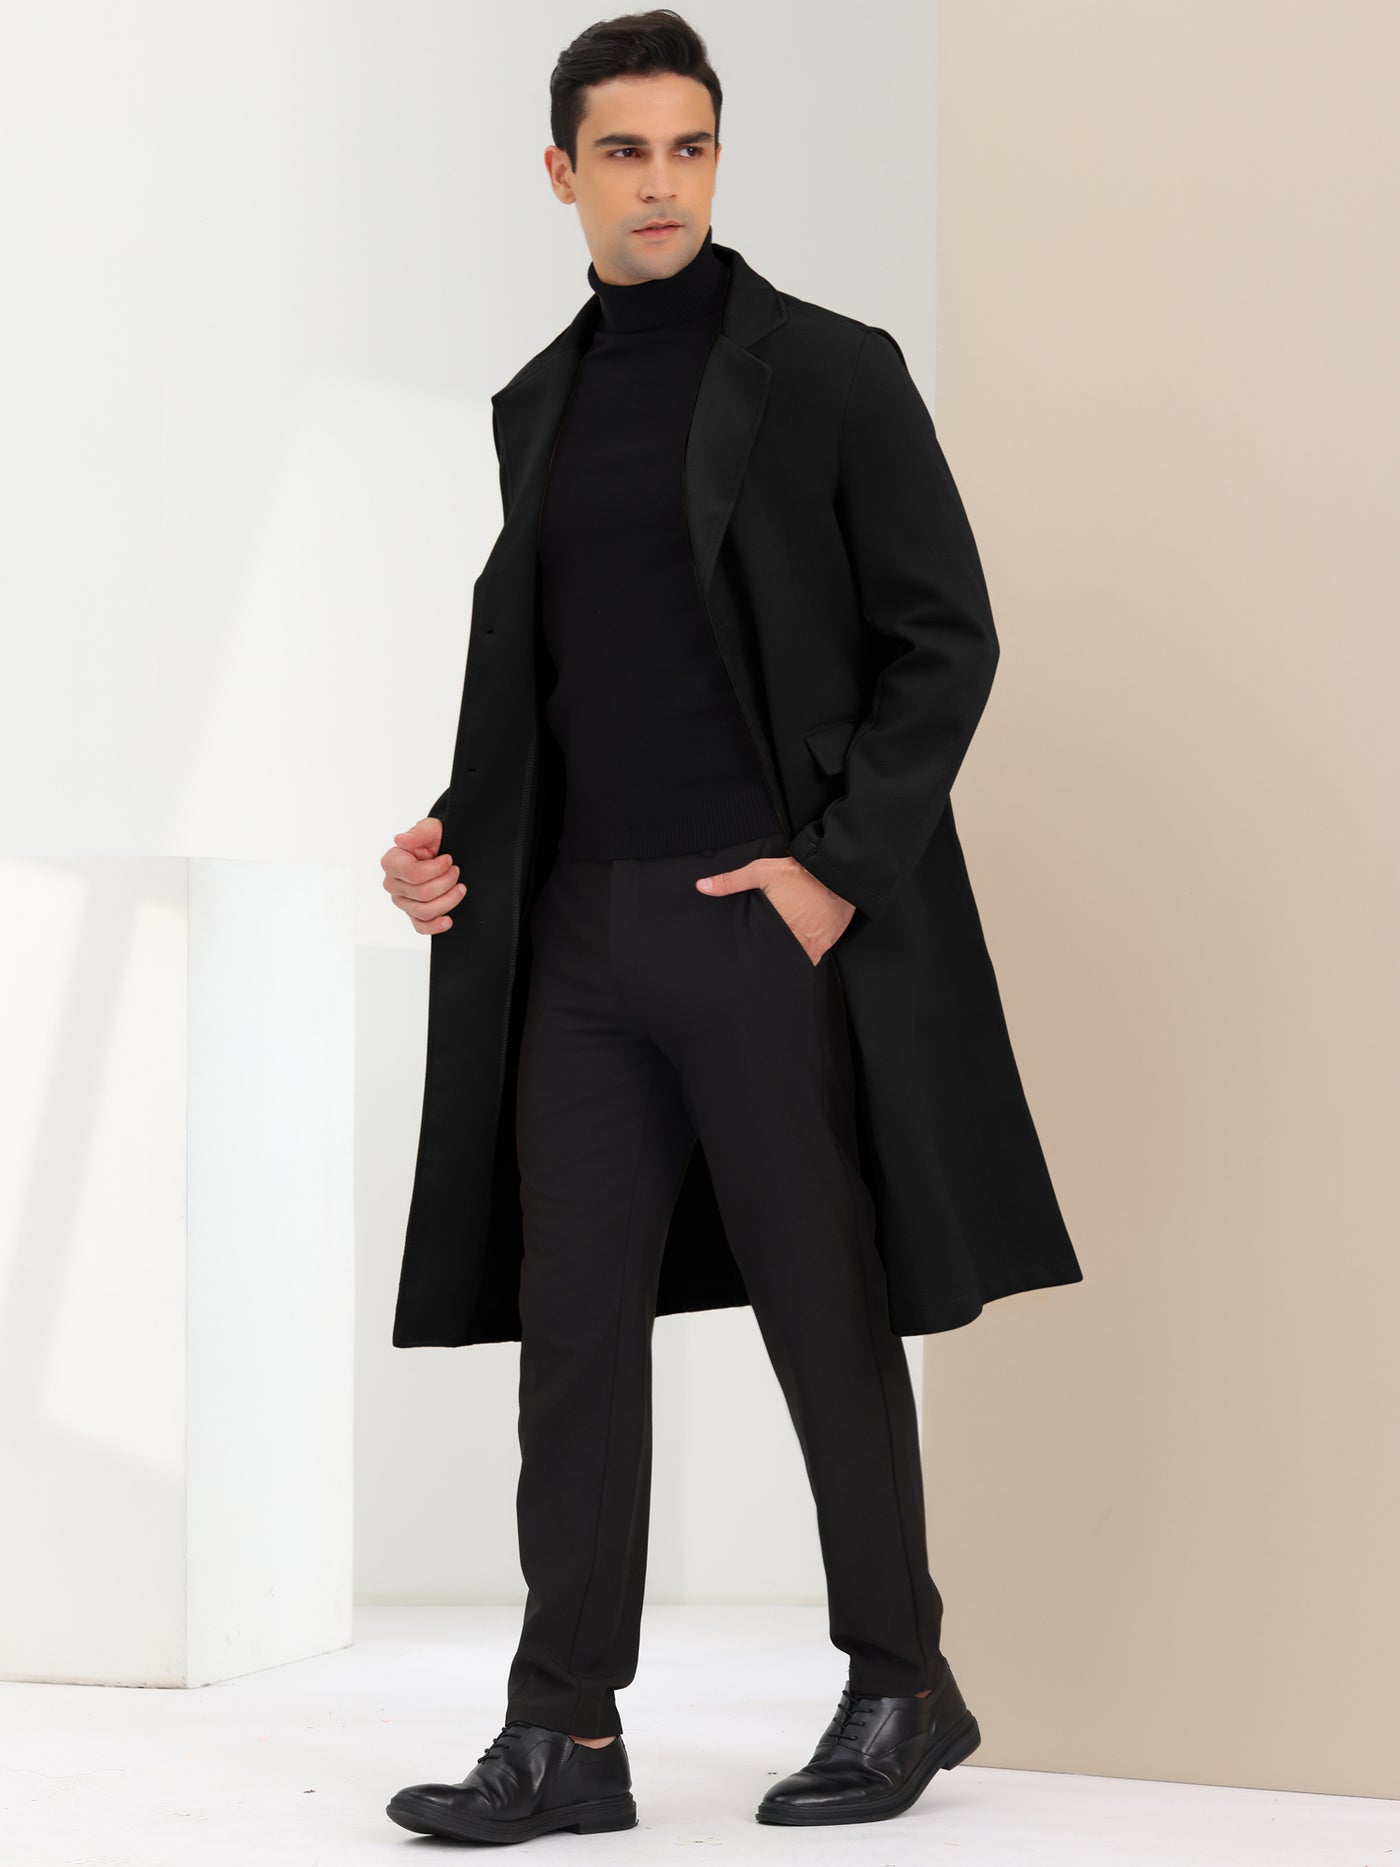 Bublédon Men's Winter Pea Single Breasted Notched Lapel Long Trench Coat